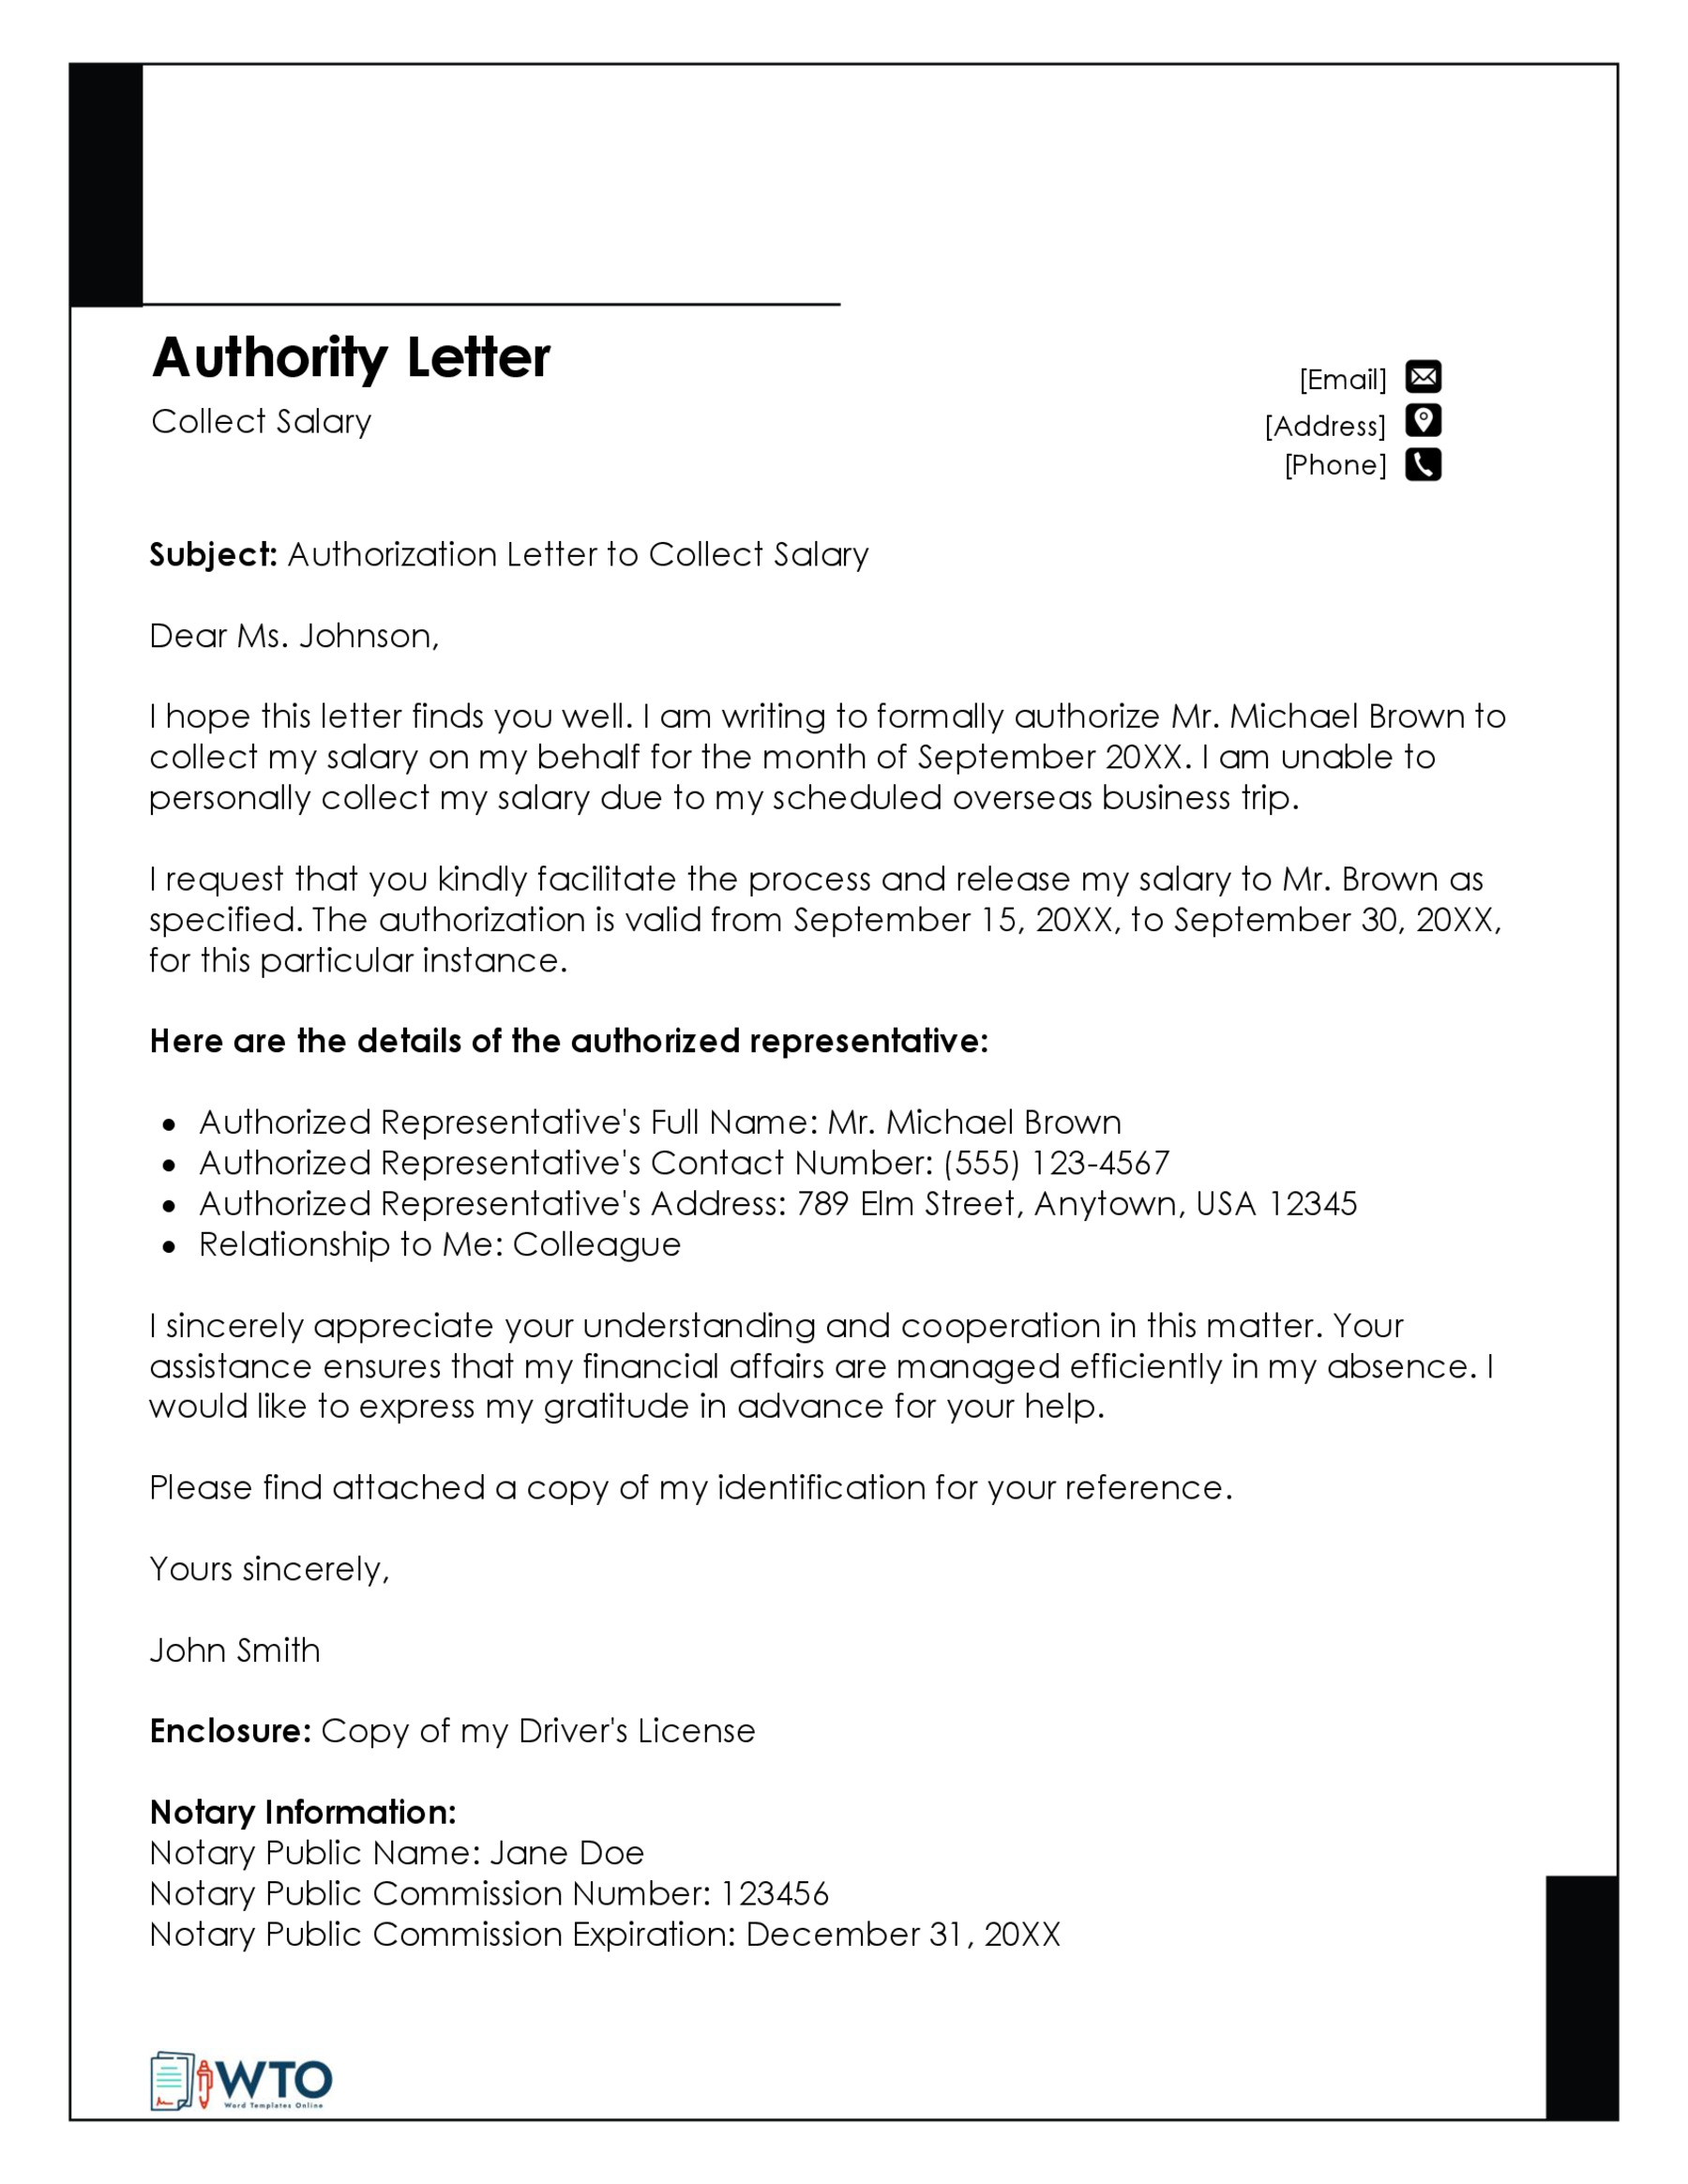 Authorization Letter to Collect Salary Sample-Ms word Free download